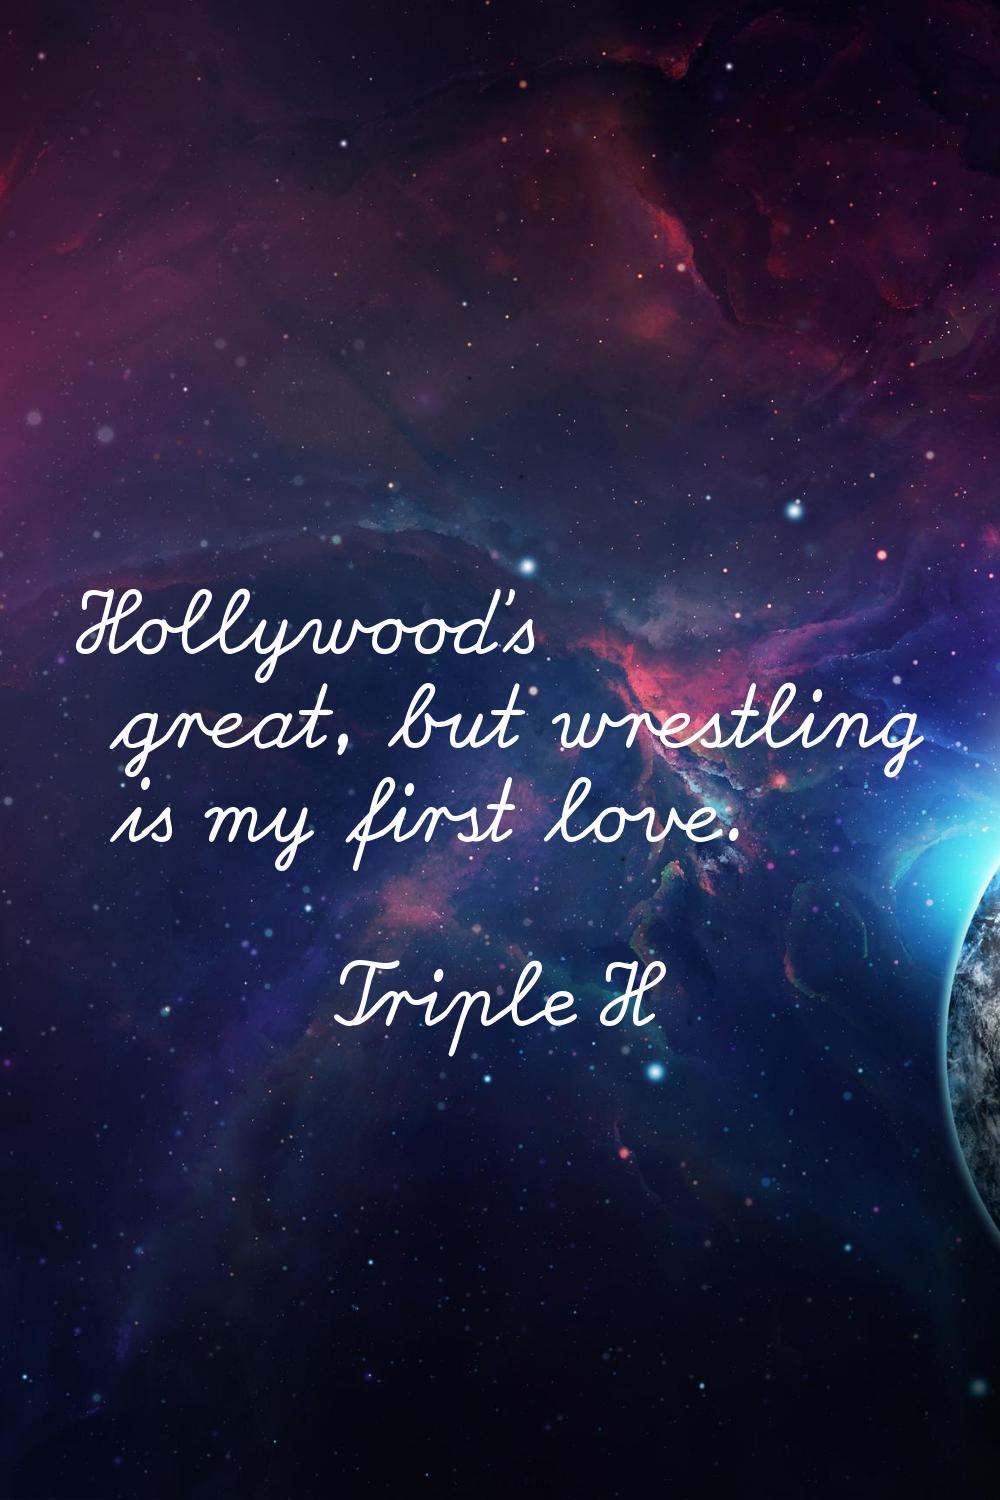 Hollywood's great, but wrestling is my first love.